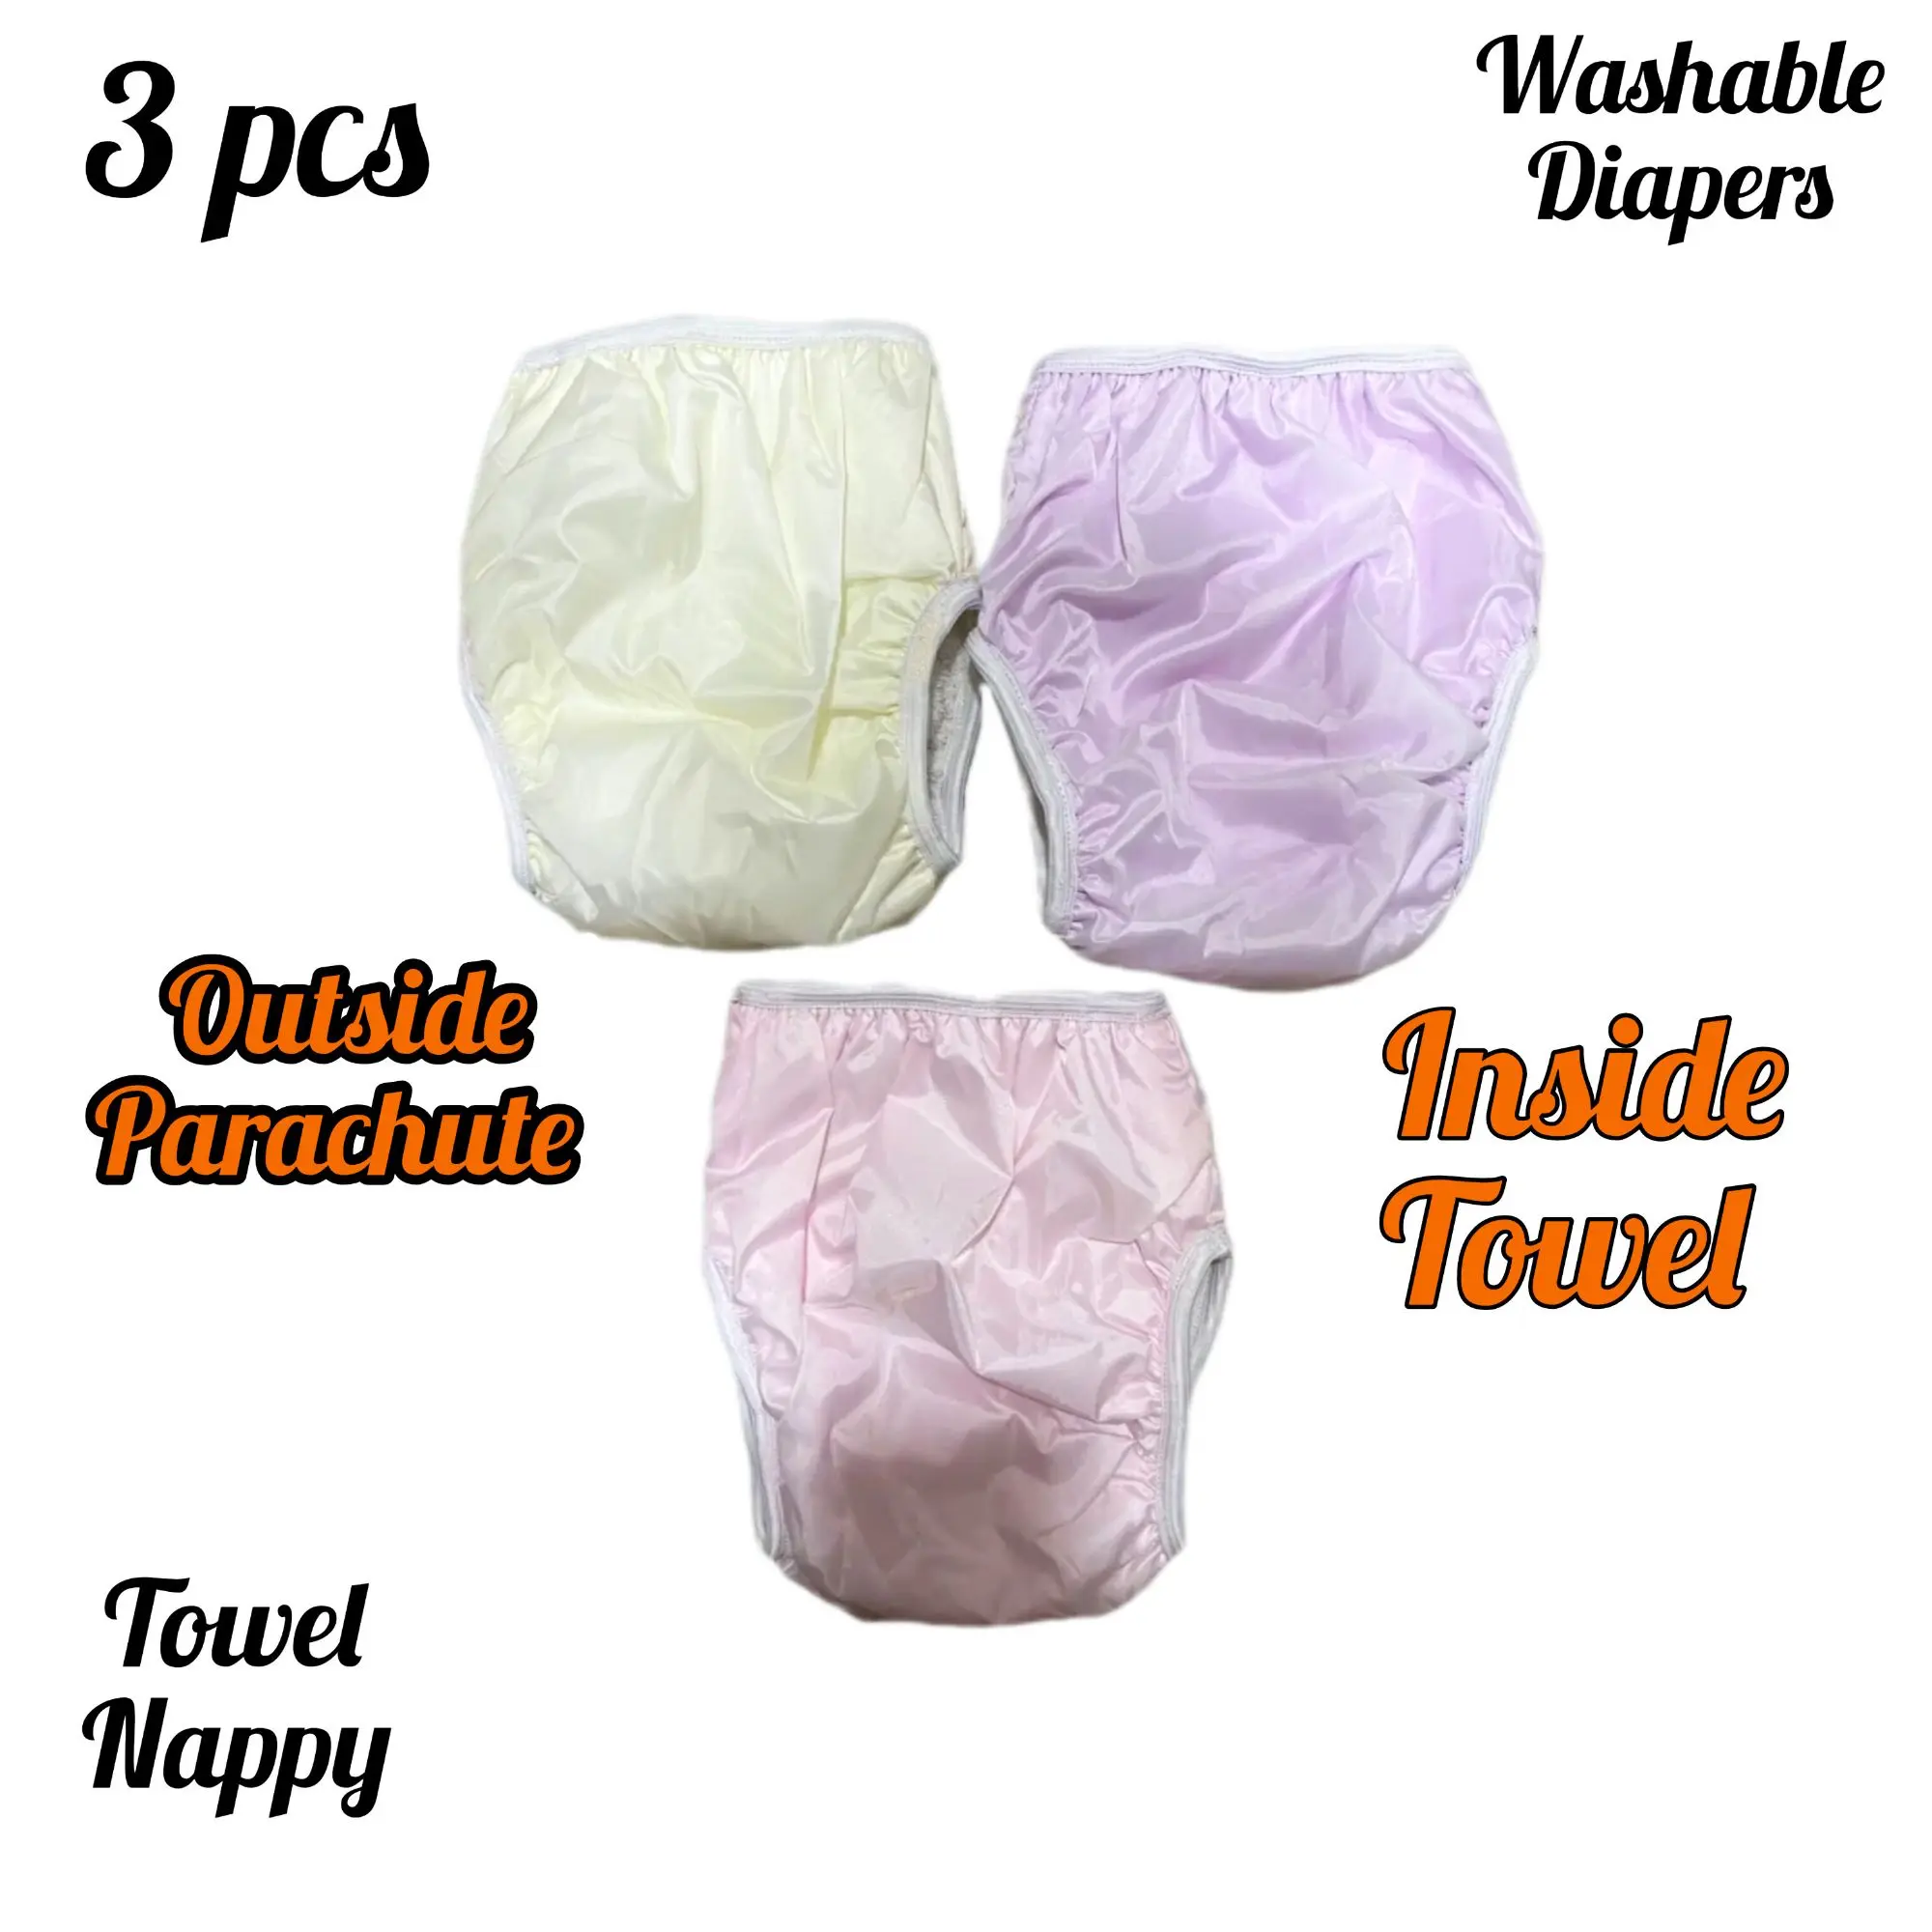 Pack Of 3 – Washable Pants Diapers / Plastic Panty / Parachute